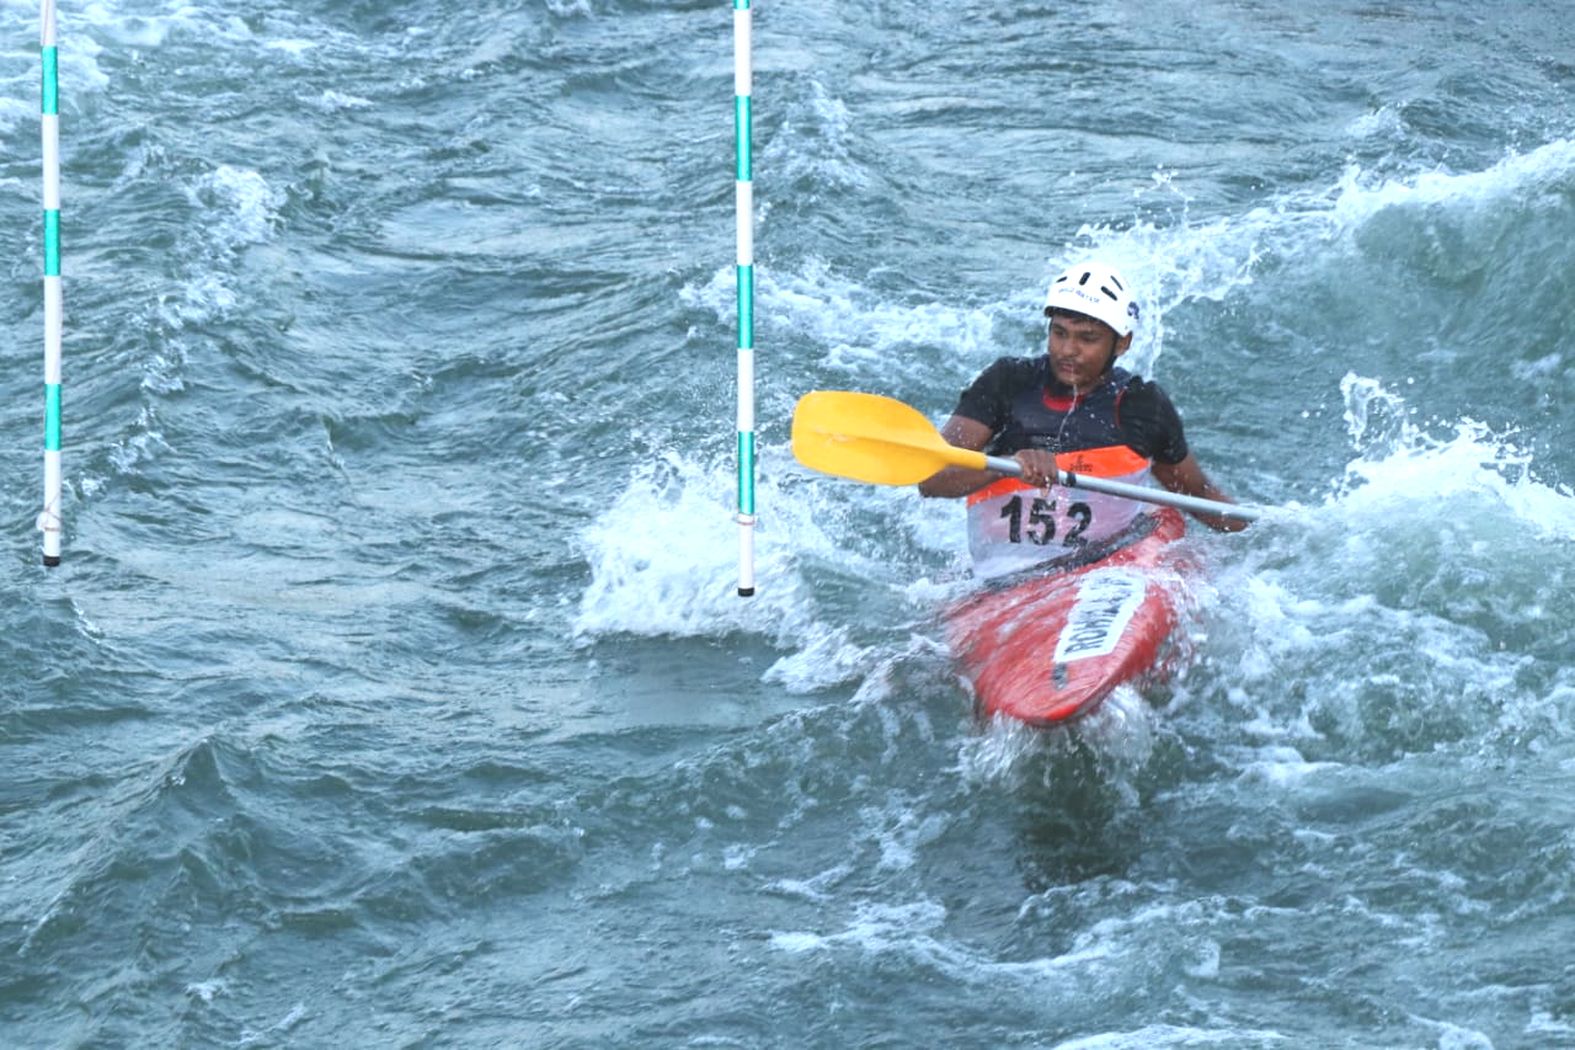 Canoeing competition in Maheshwar